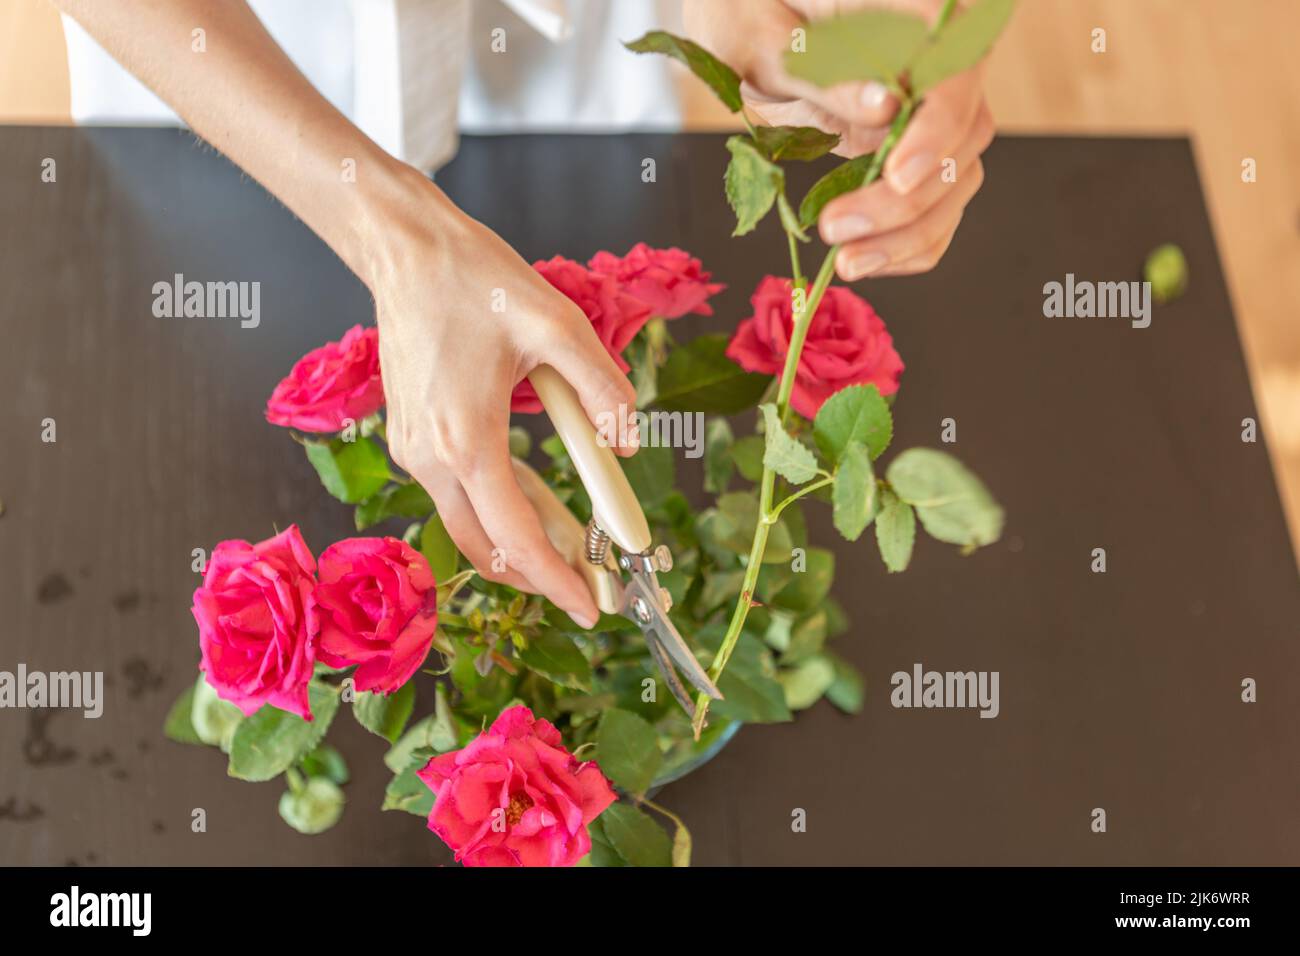 Woman's hands cutting home a rose Stock Photo